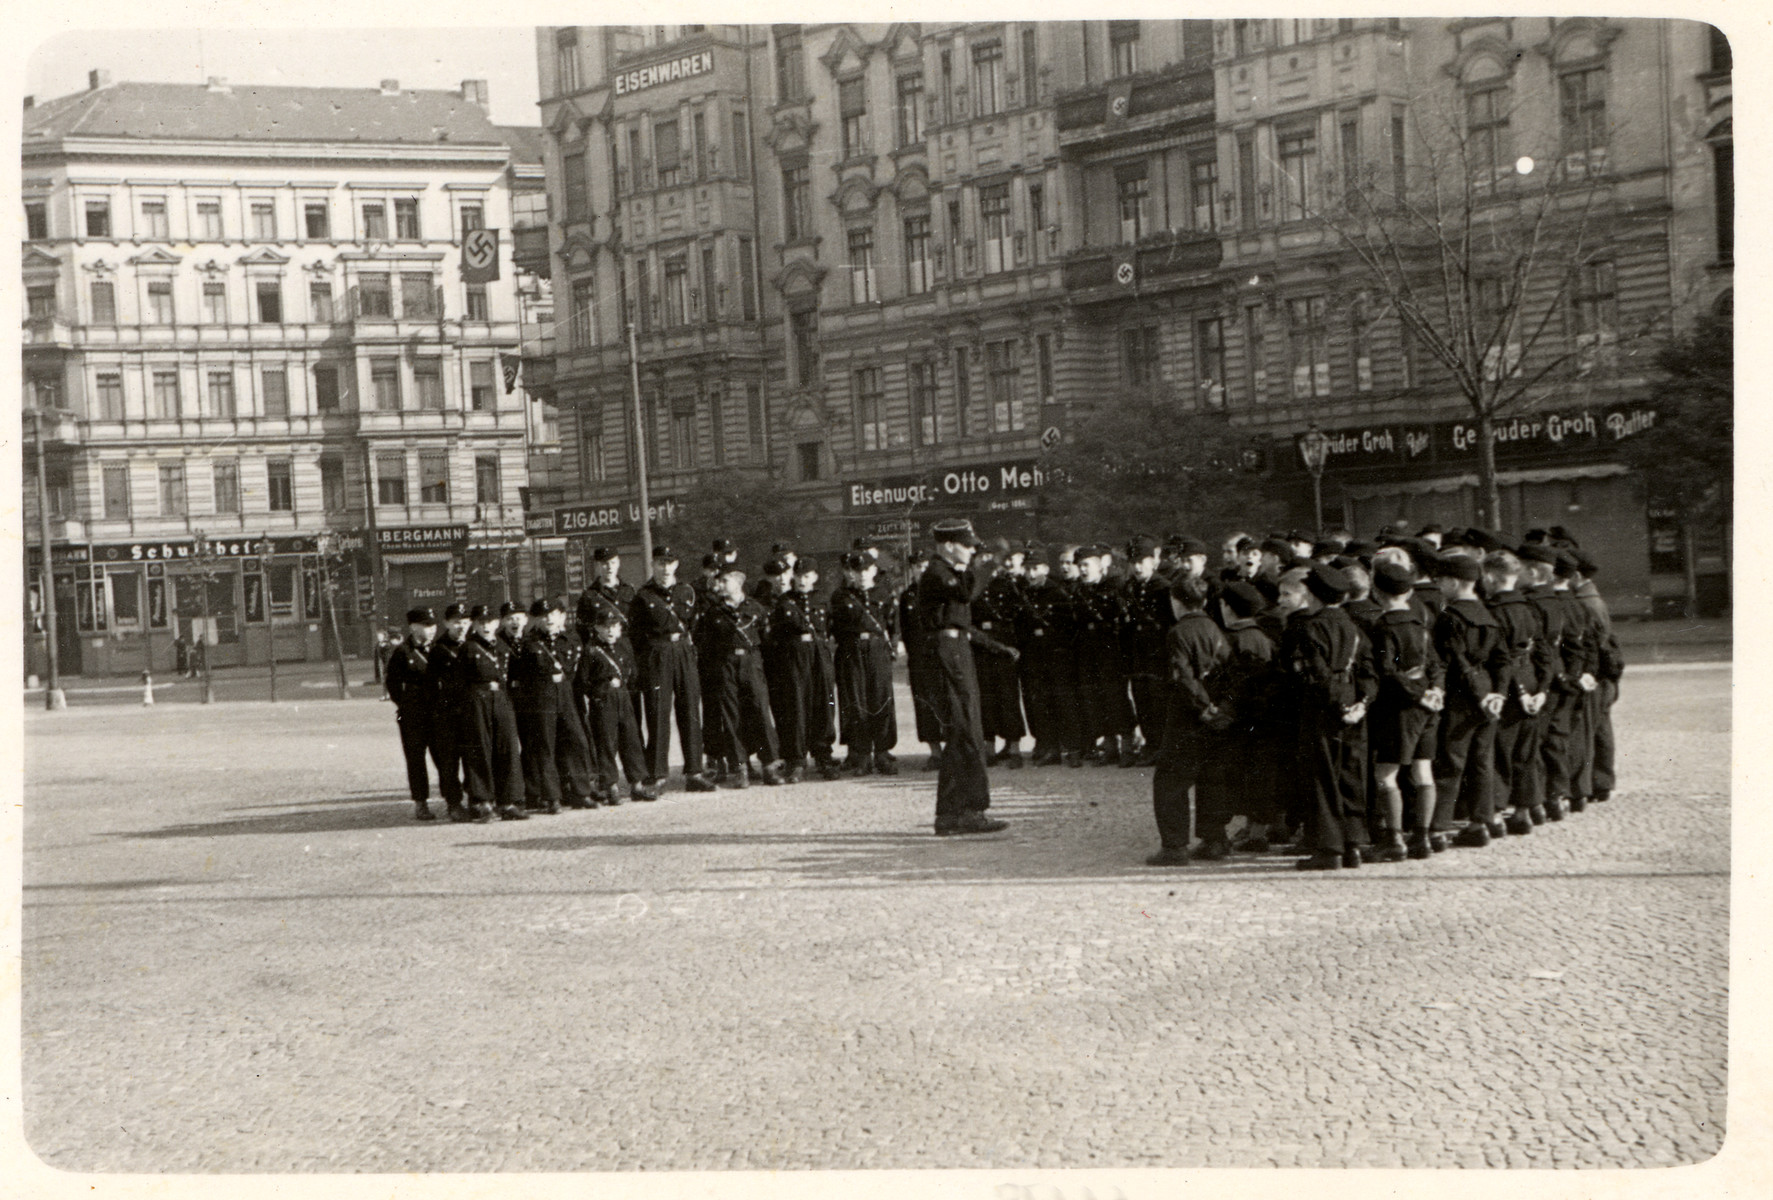 Hitler Youth gather on a street in Germany. 
 
[This image from Berlin was found in the P-20-1939 contact book]